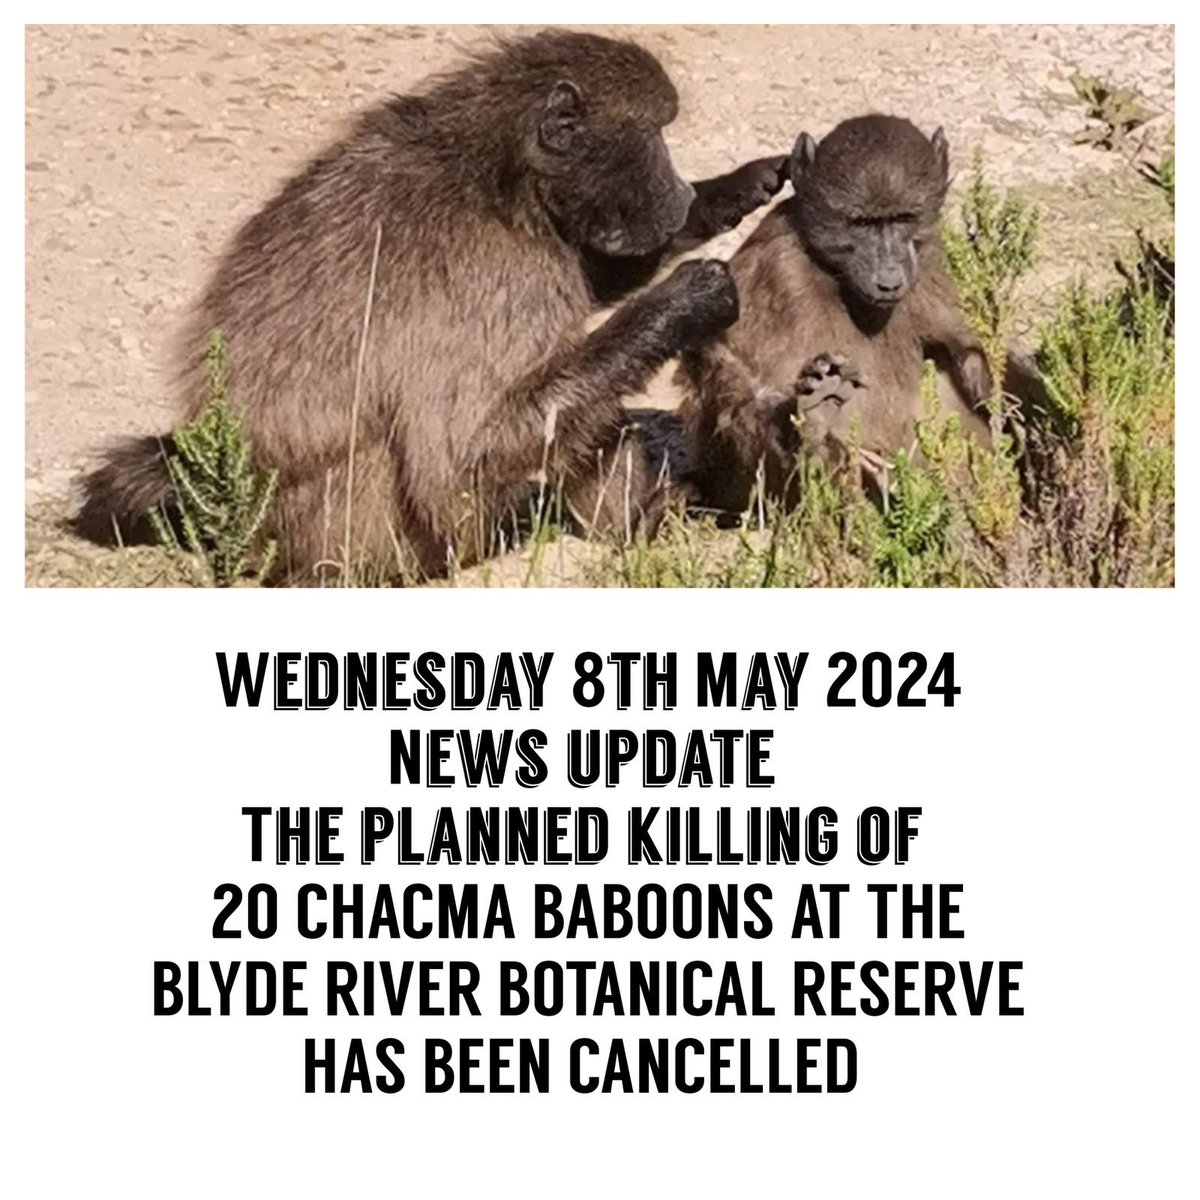 @WAPFSA has been reliably informed that the planned killing of 20 baboons at the #BlydeRiverBotanicalReserve has been cancelled. We would like to thank @BarbaraCreecy_ @LimpopoLEDET @OtpLimpopo and WAPFSA member organisations and their supporters. @Netwerk24